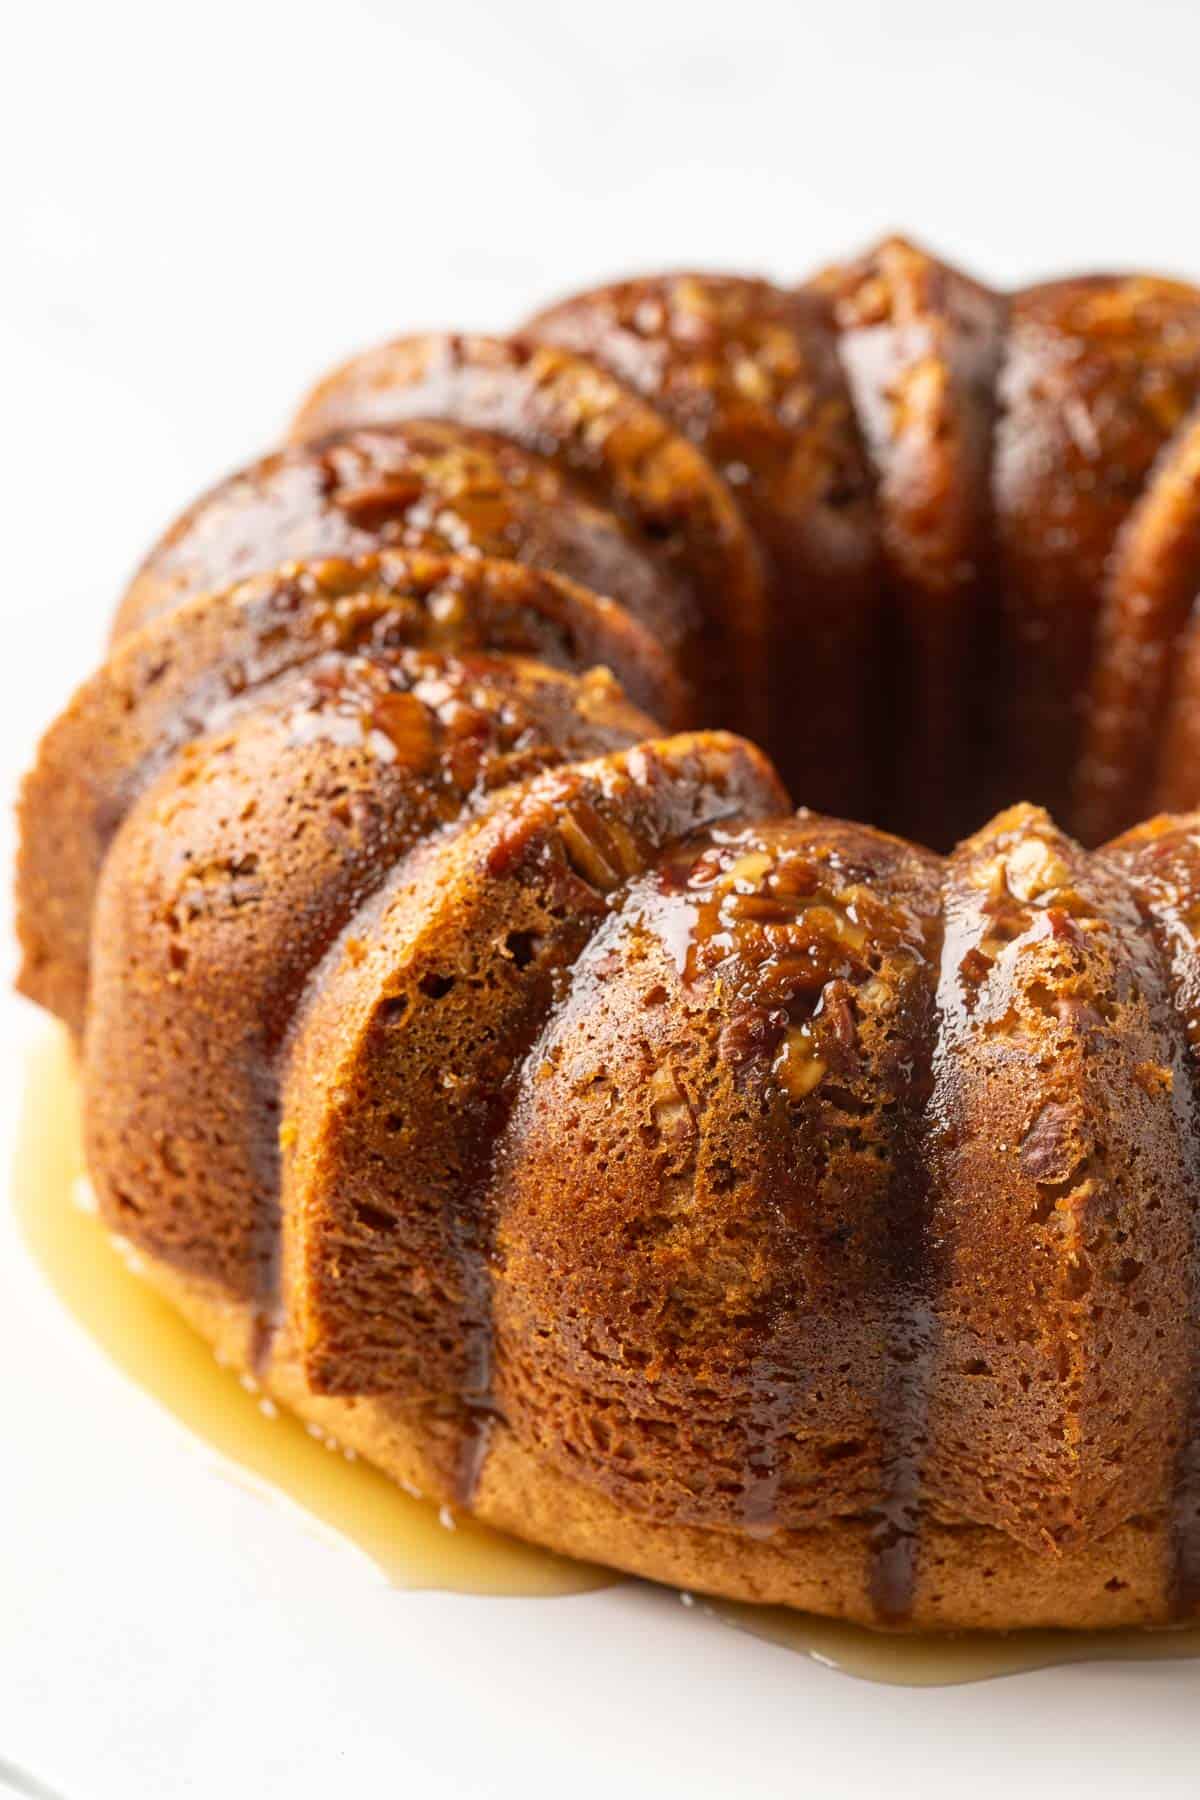 Front angled view of a Bacardi rum cake with rum glaze.